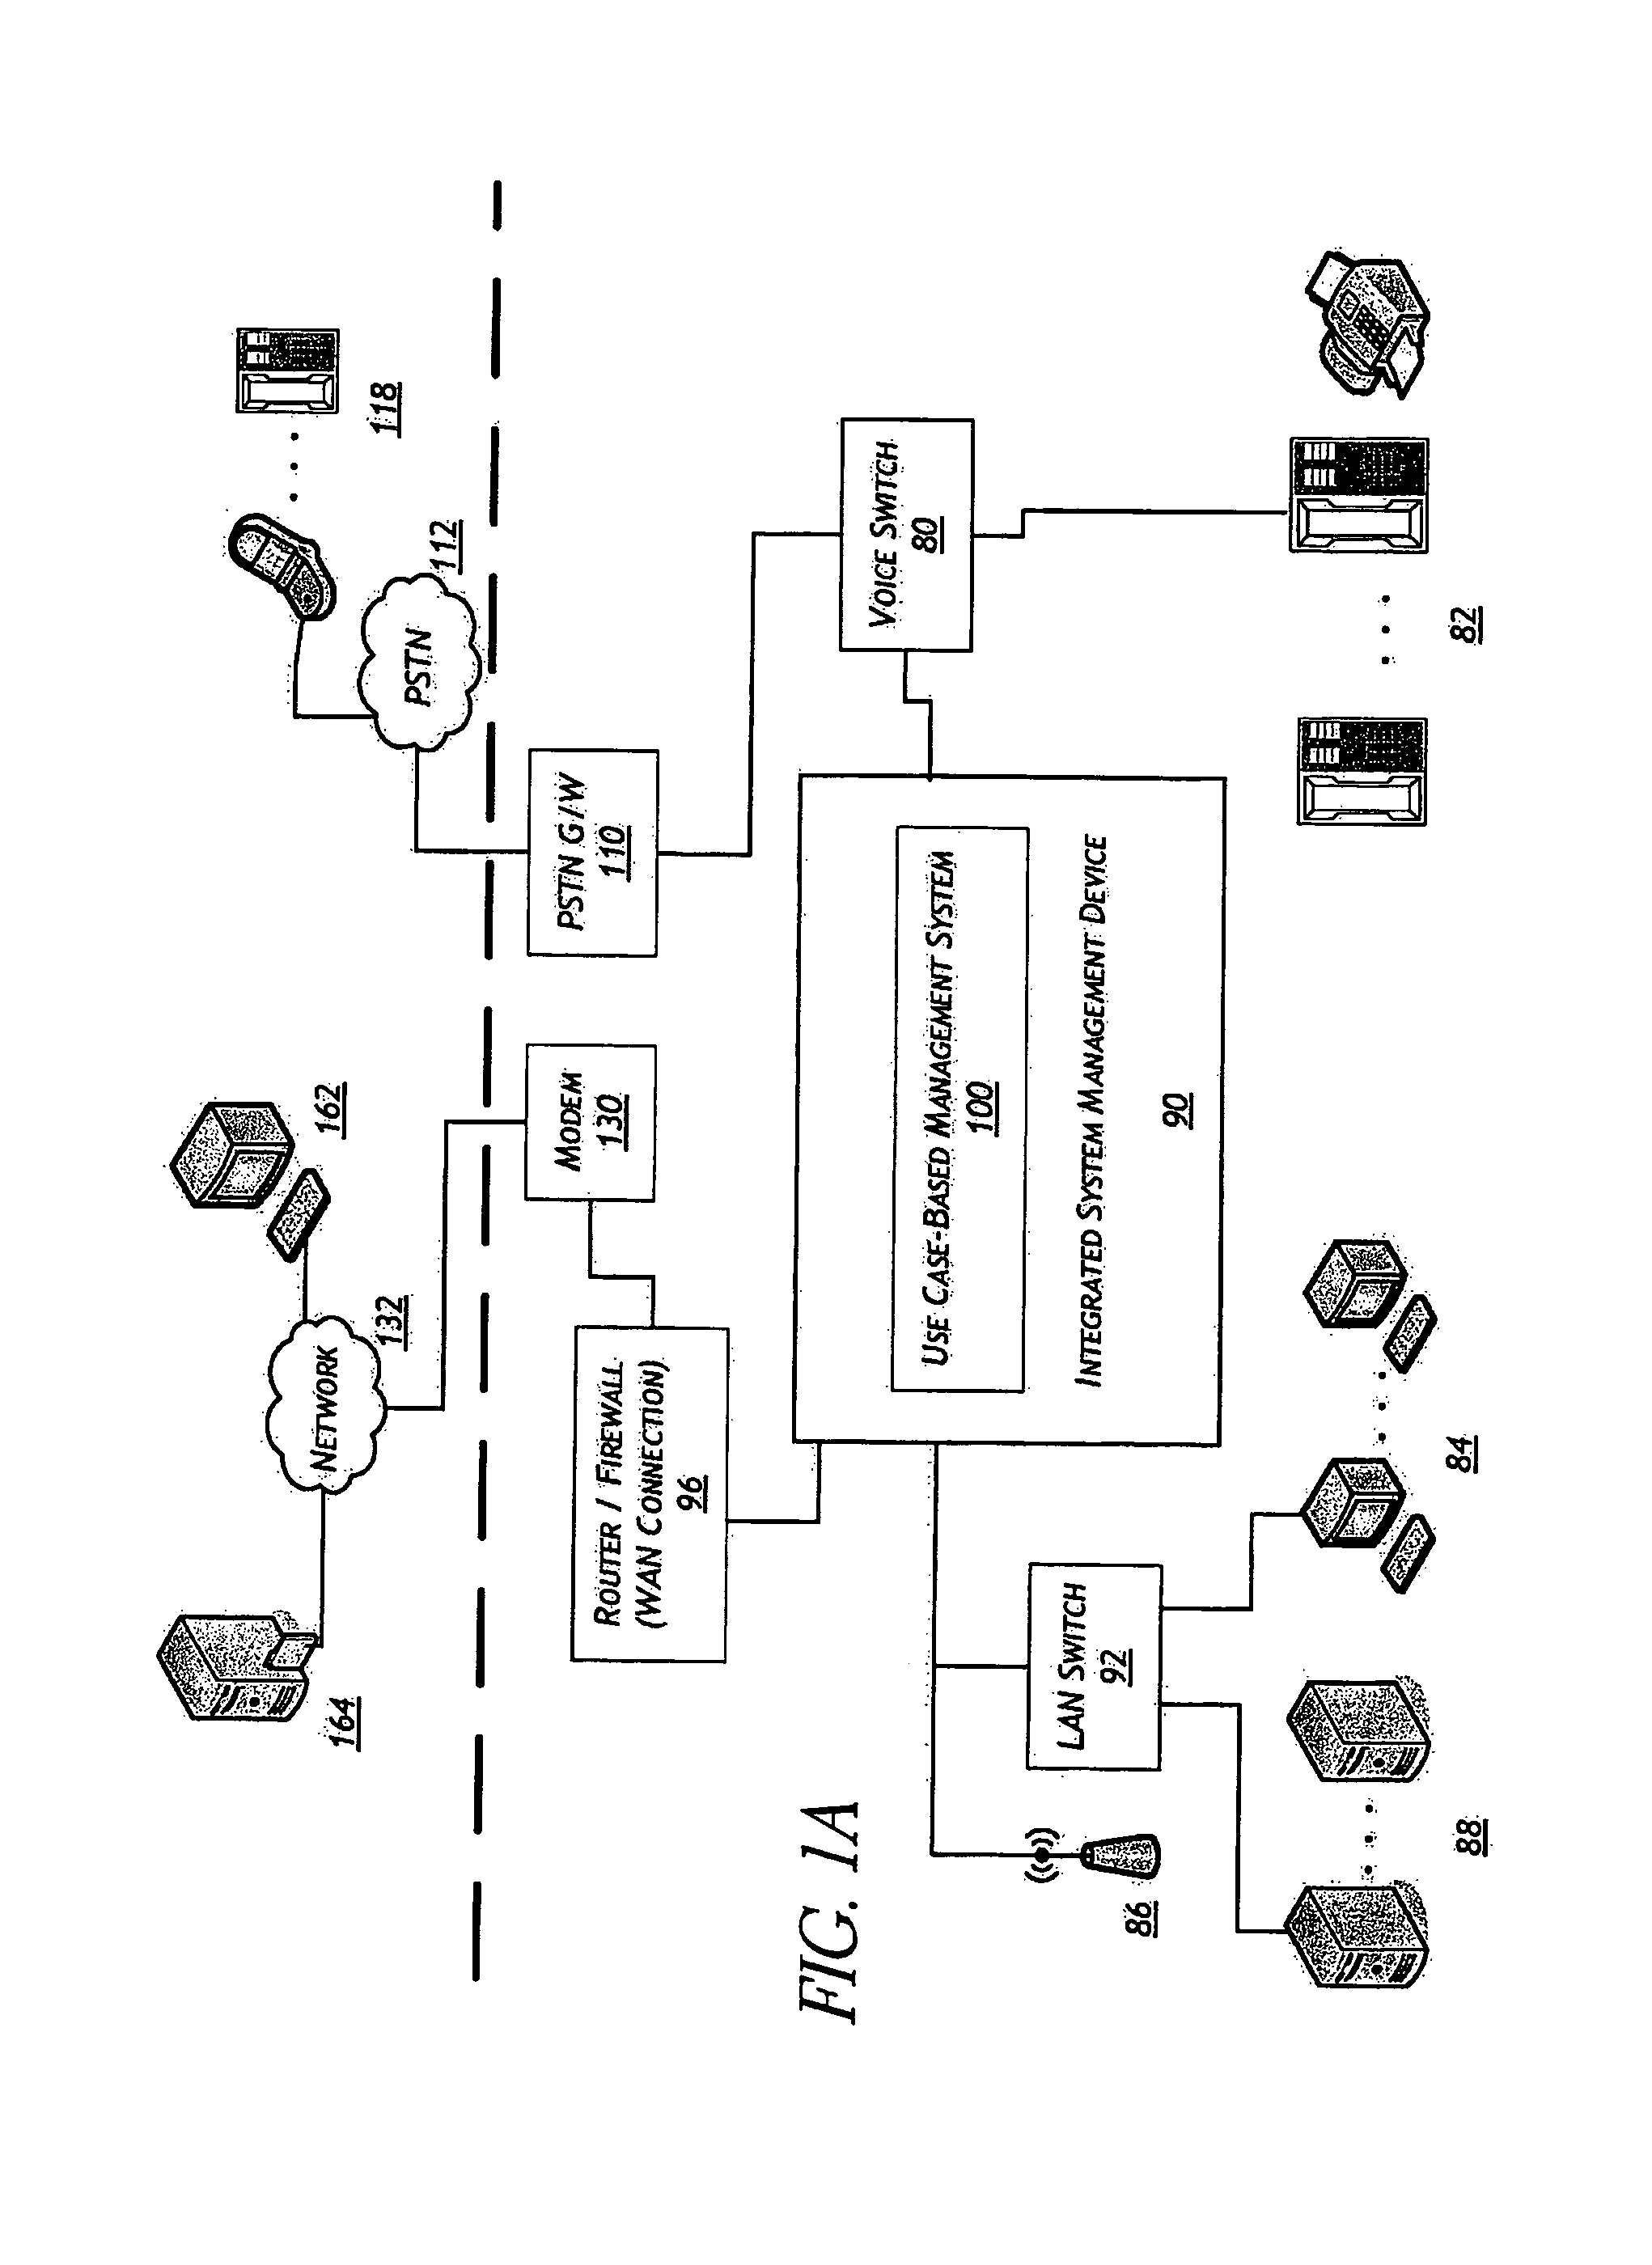 Systems and methods for managing converged workspaces